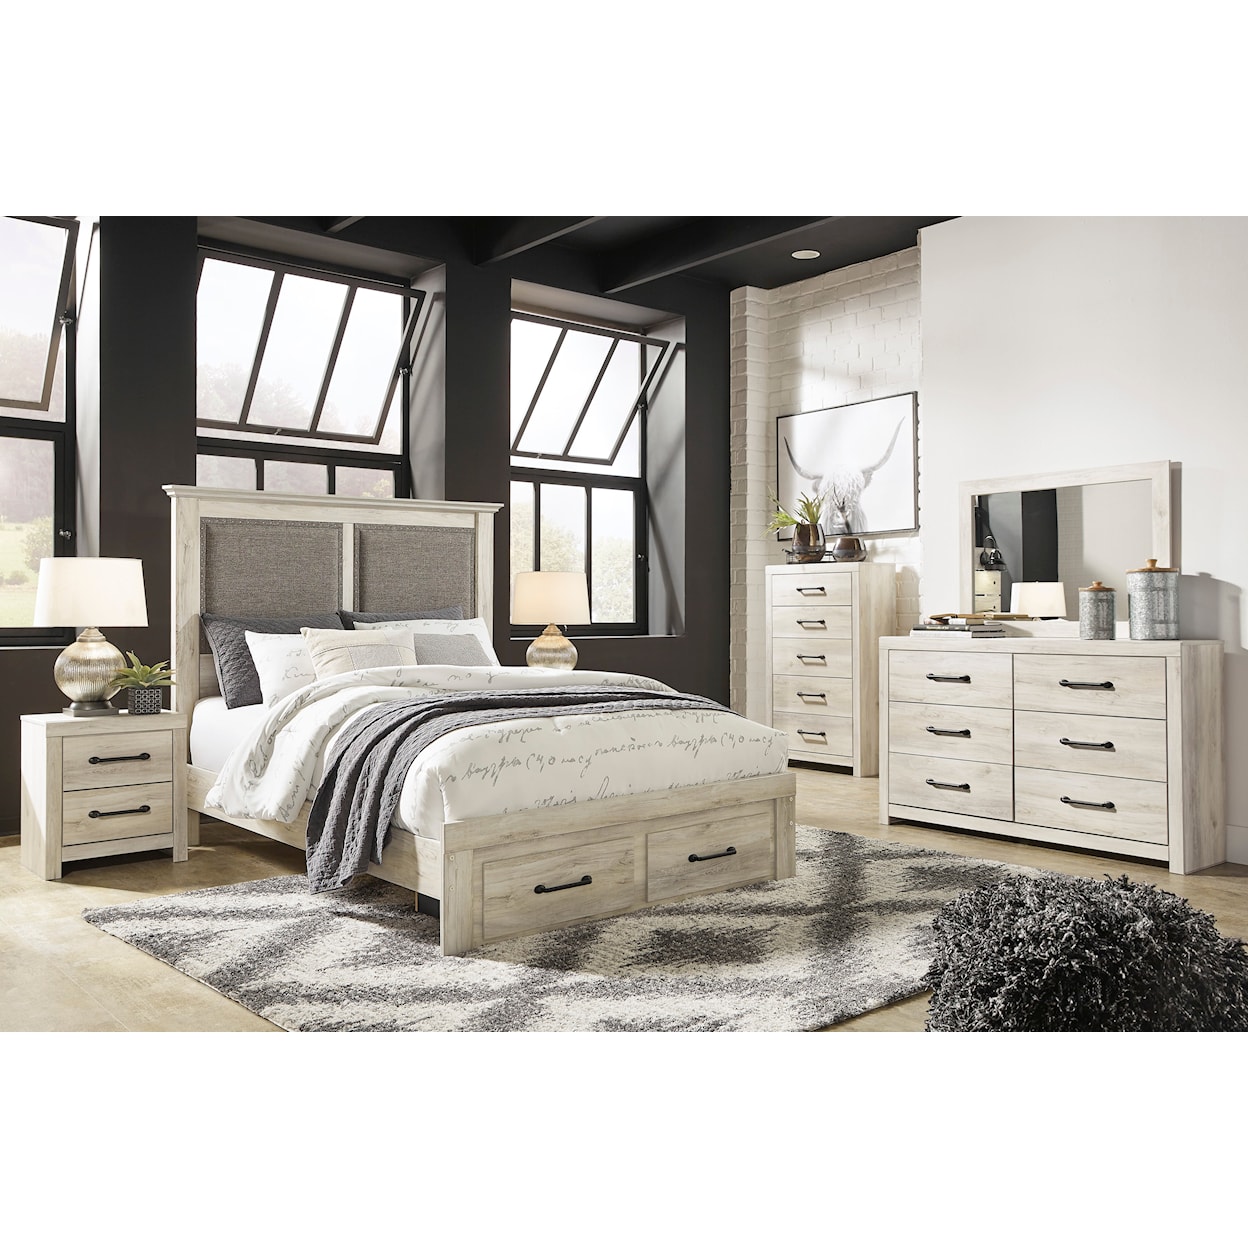 Signature Design by Ashley Cambeck Queen Bedroom Set